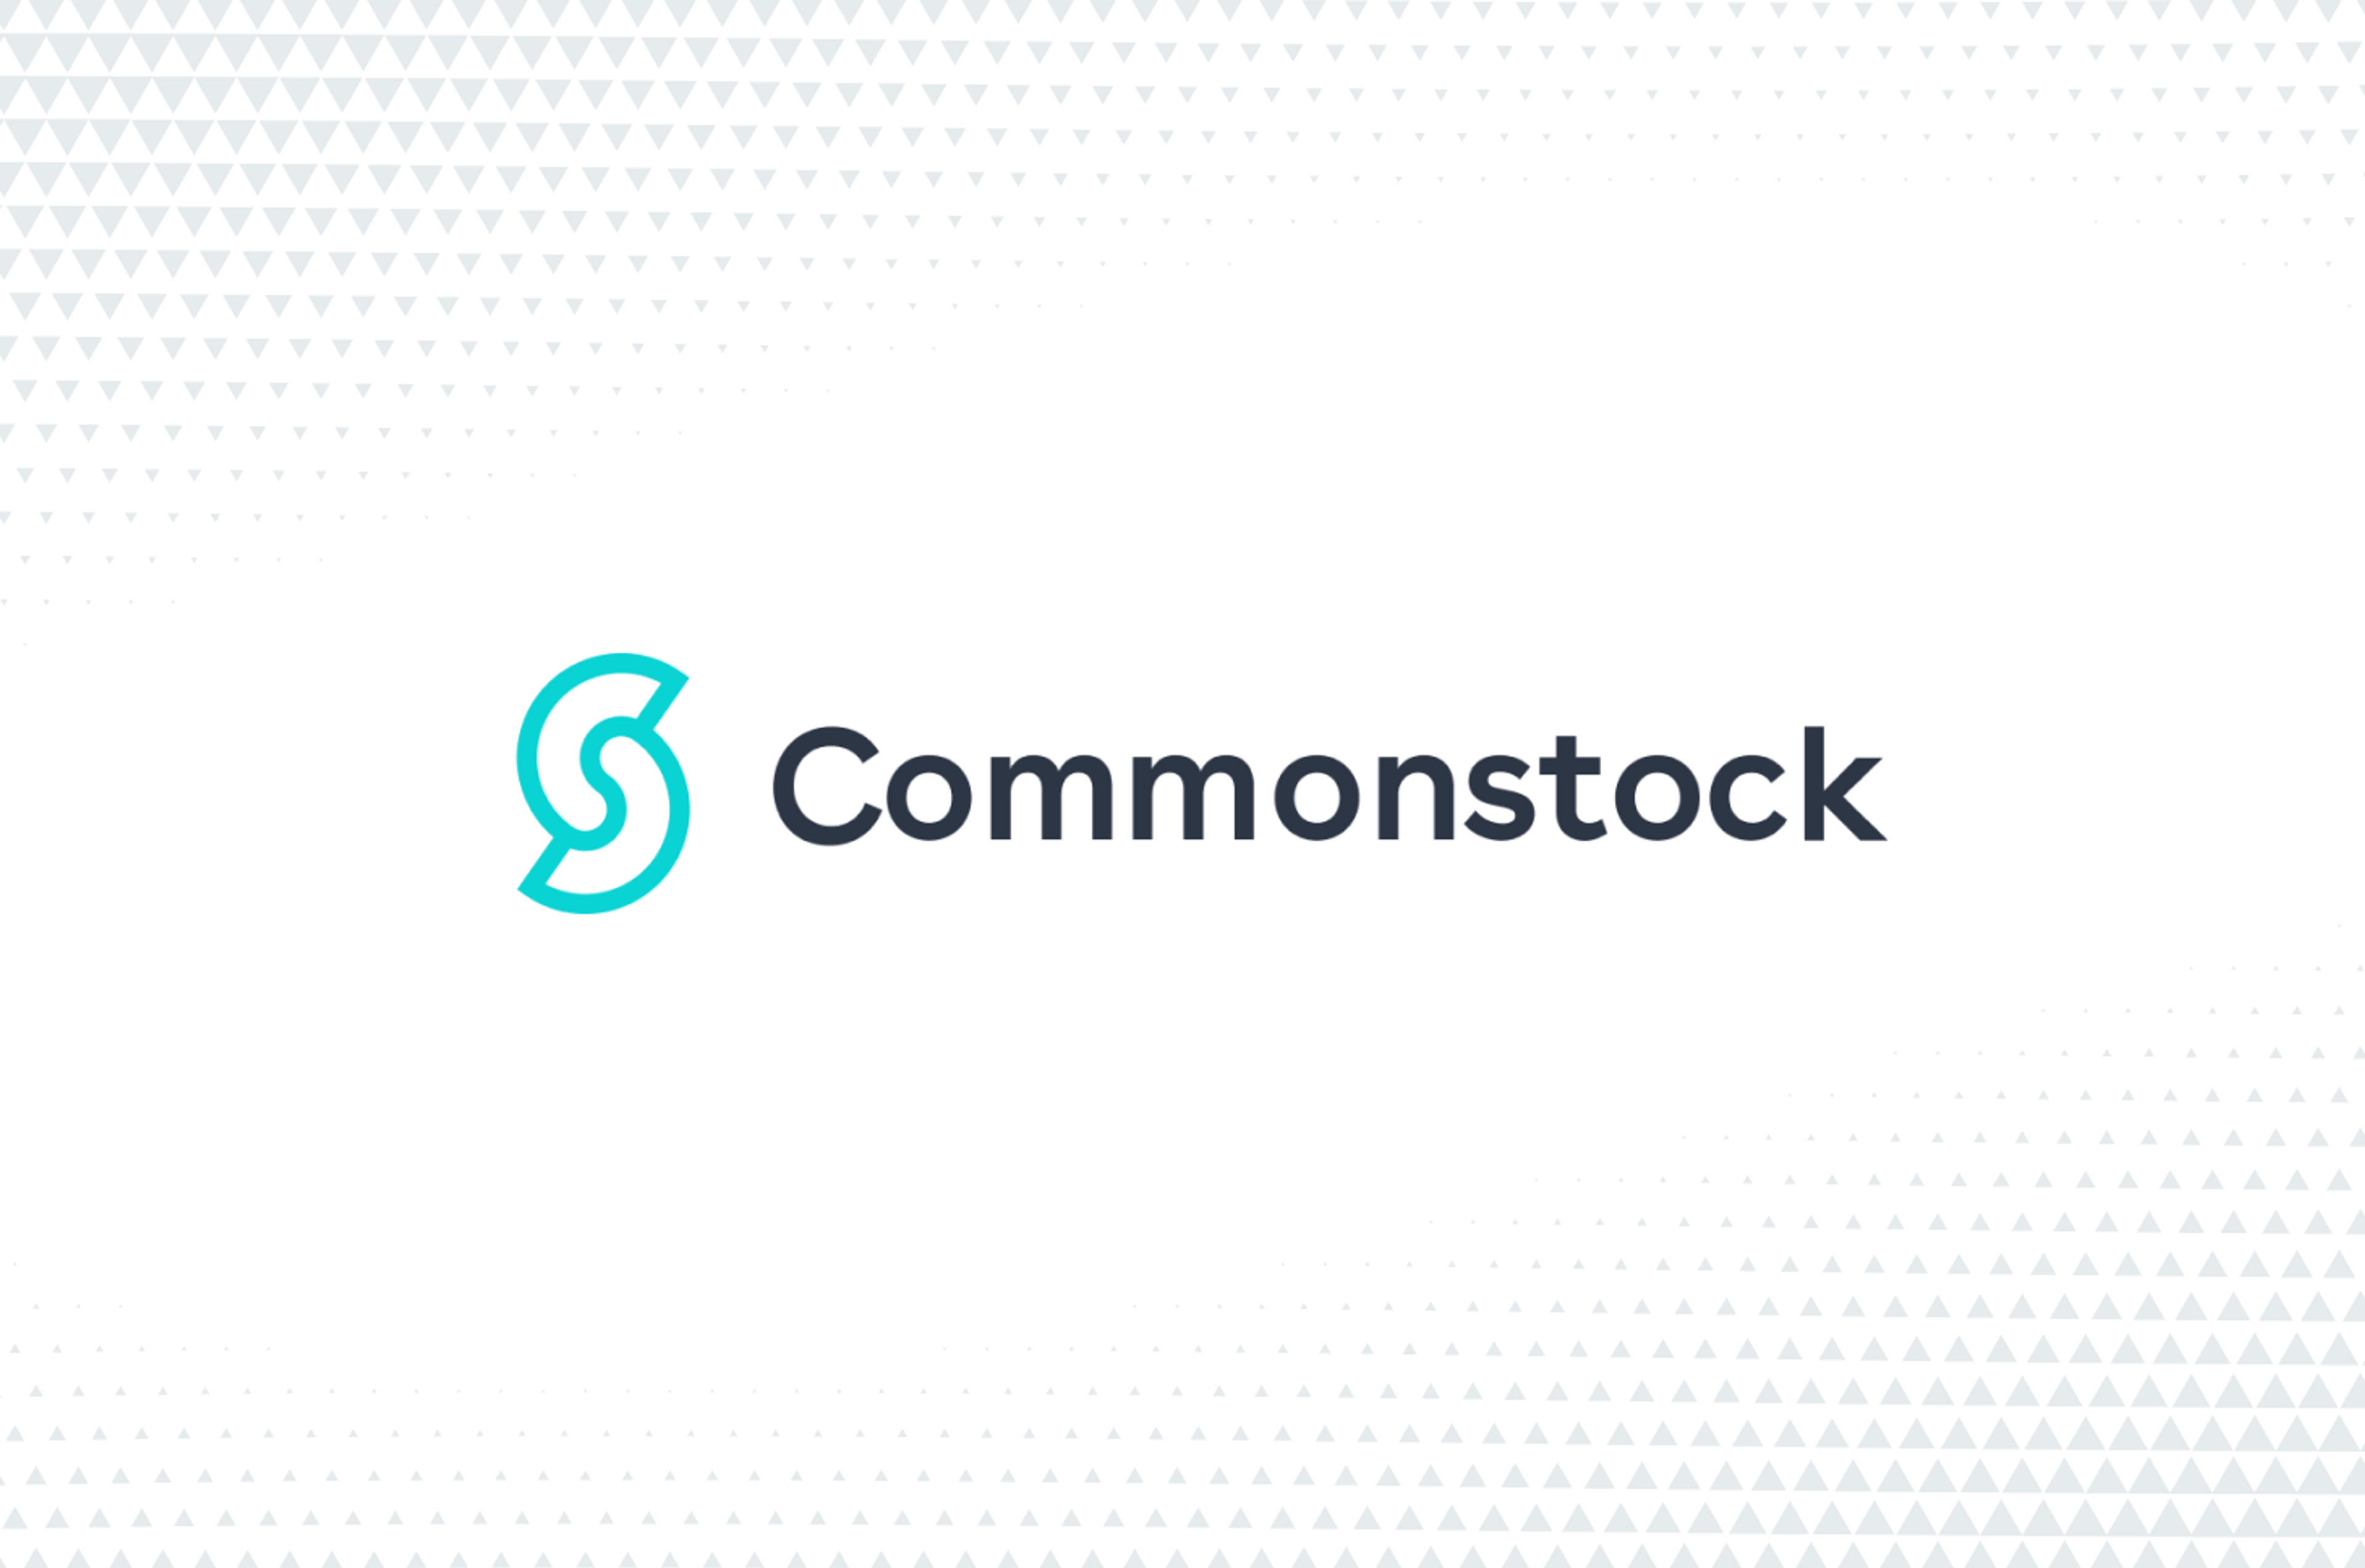 Commonstock’s Journey to Next-Generation Applications and AI with Astra Streaming